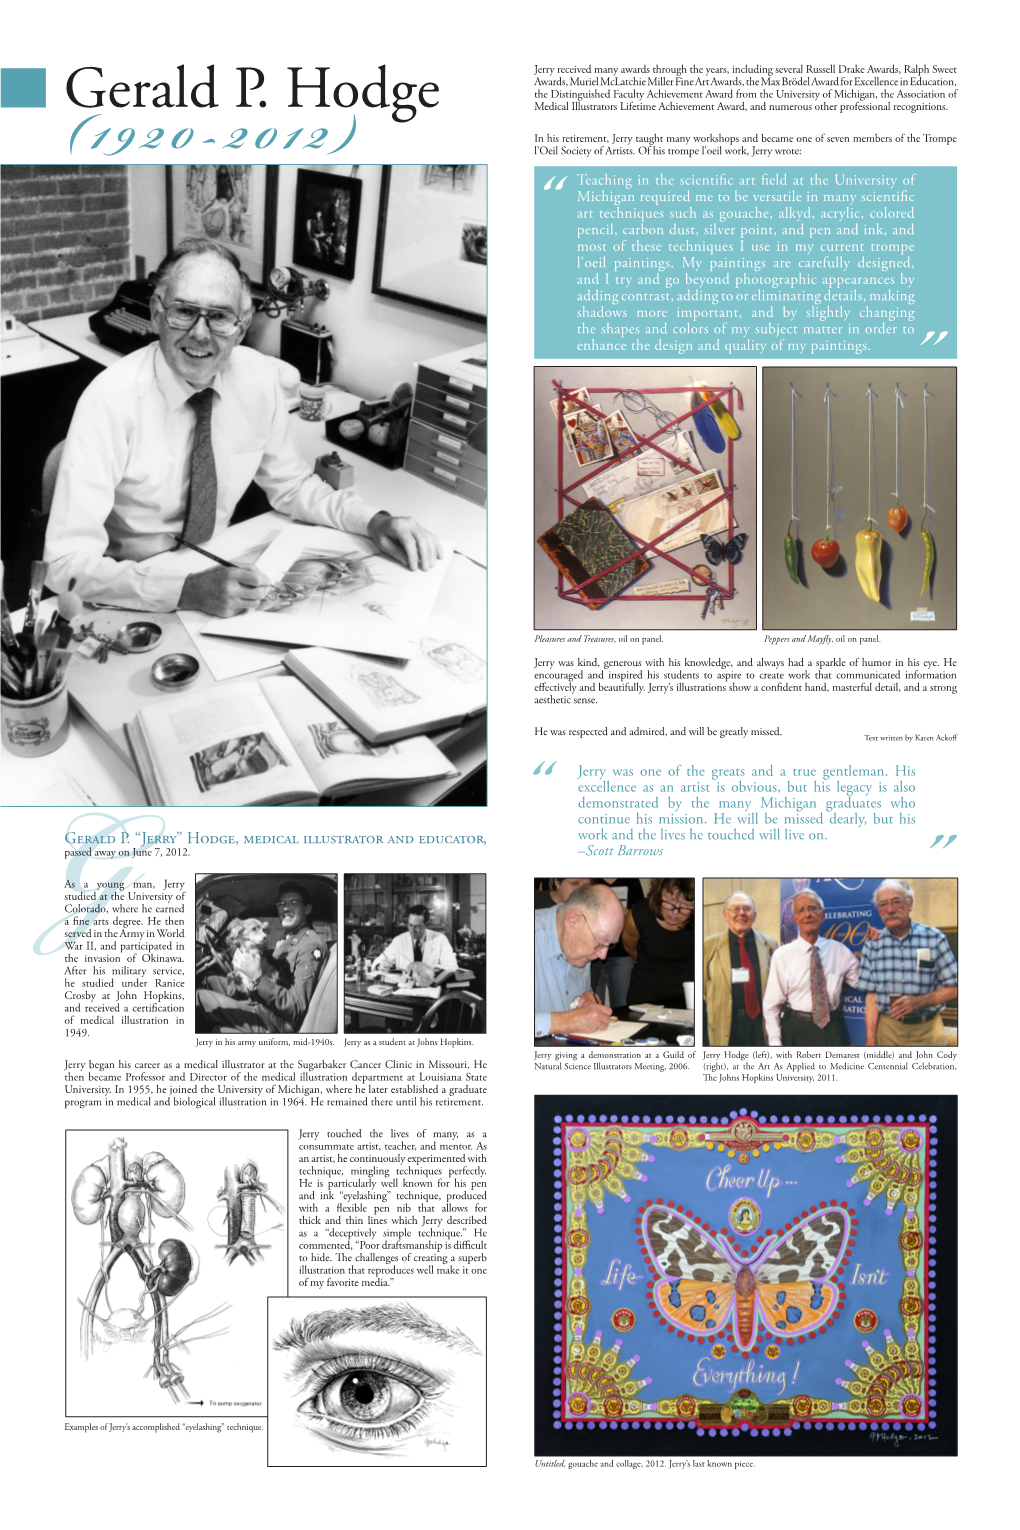 Gerald P. “Jerry” Hodge, Medical Illustrator and Educator, Work and the Lives He Touched Will Live On